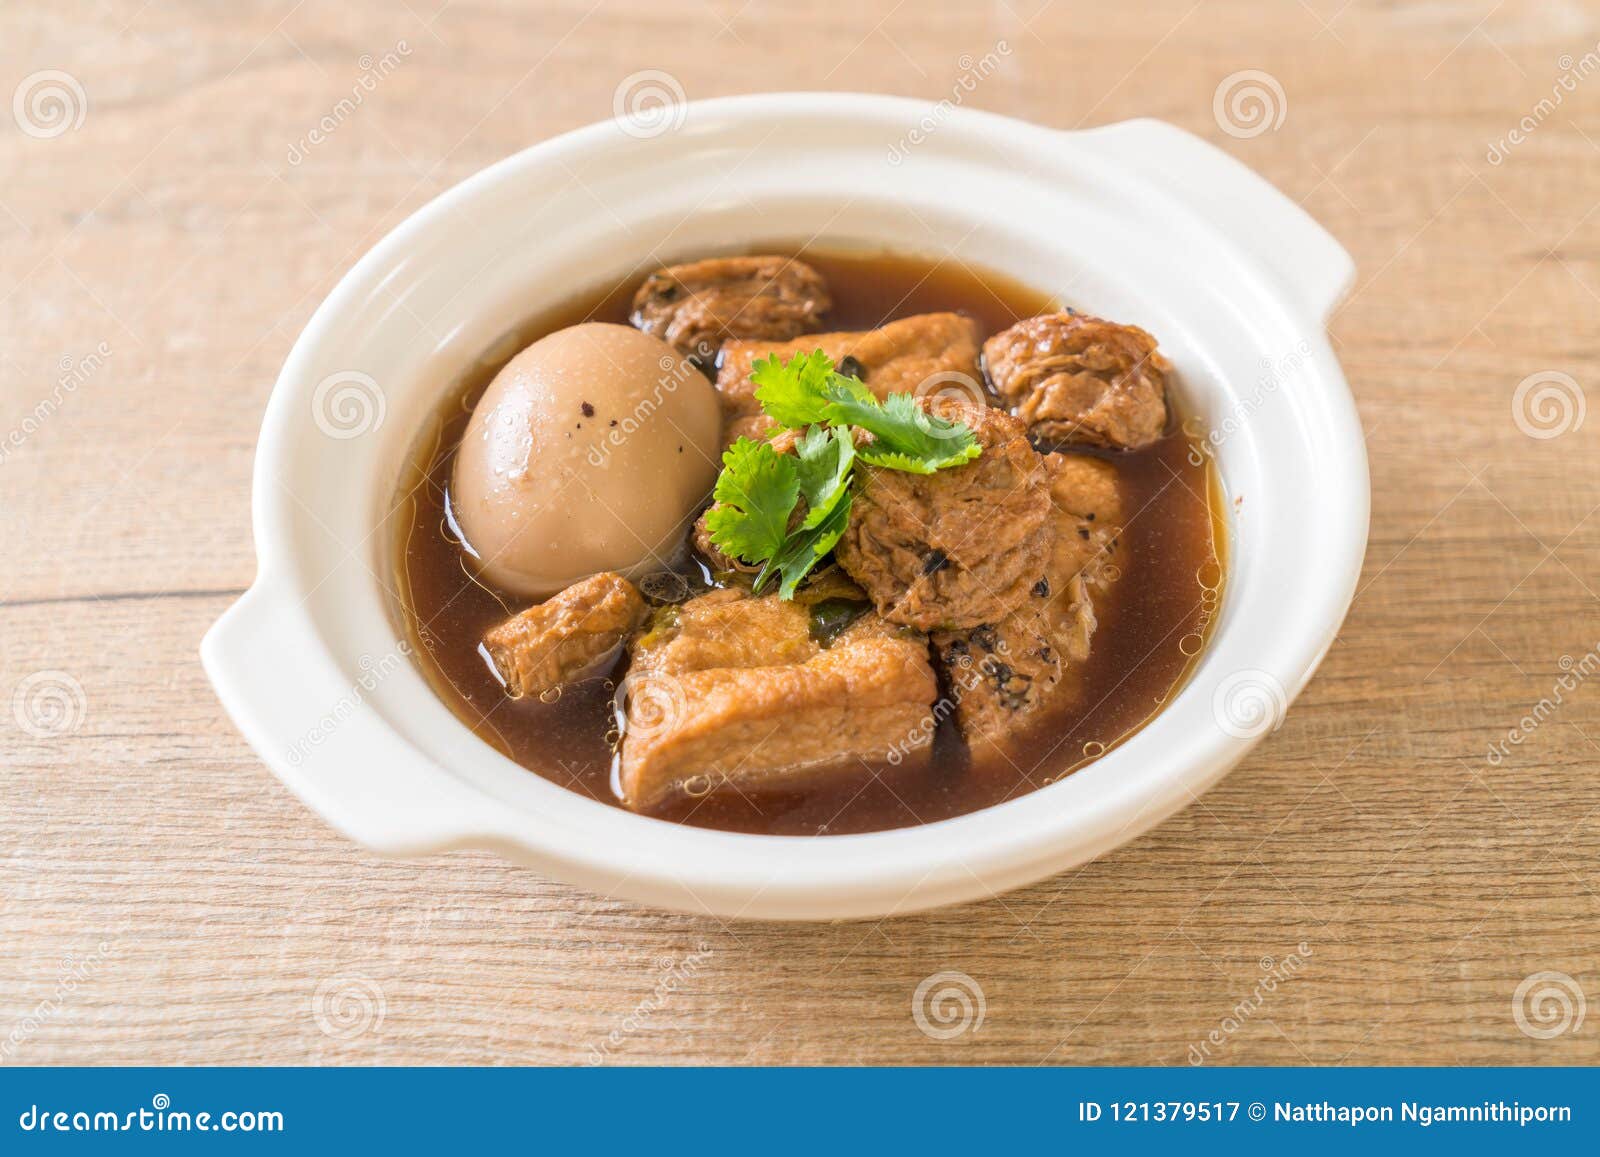 Hard-boiled Eggs In The Sweet Gravy With Tofu Stock Image ...